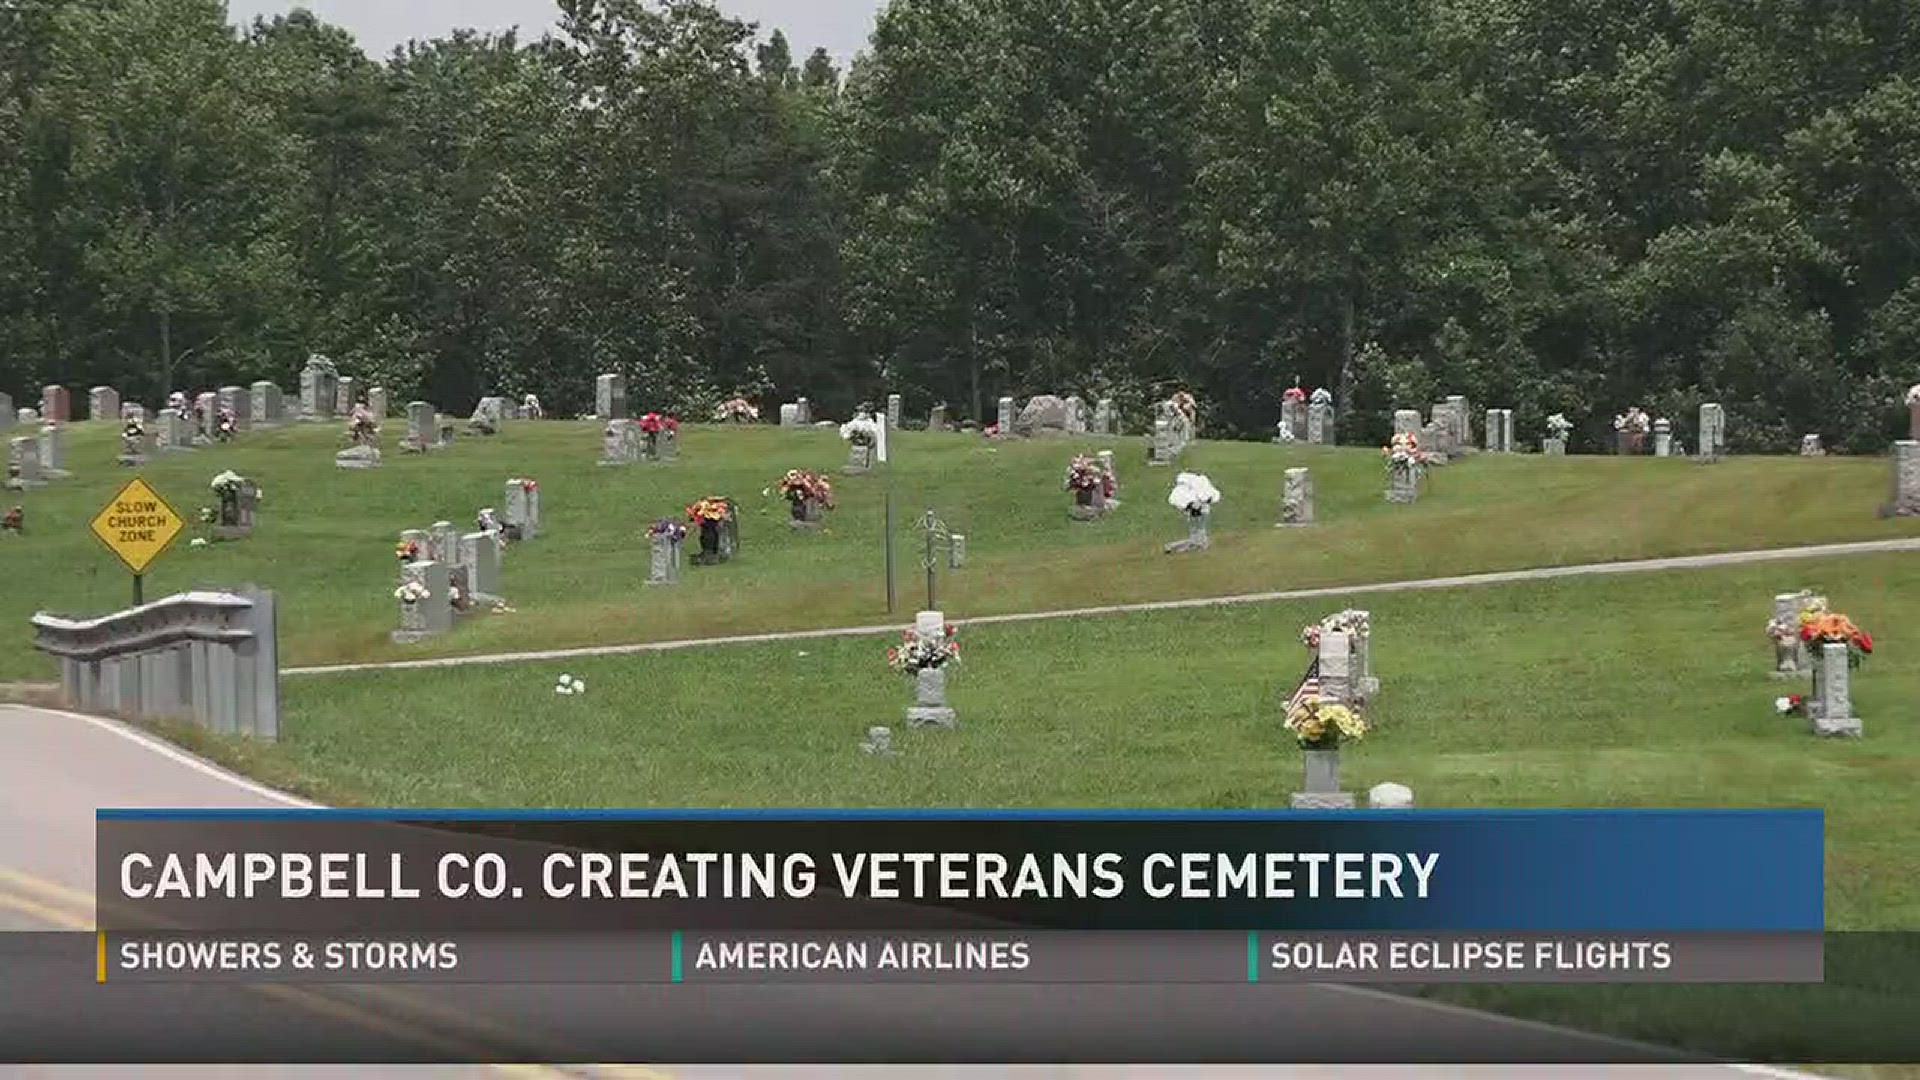 The families of veterans who live in rural areas often have to drive up to 75 miles to see their graves in VA cemeteries, but Campbell Co. is working to change that for their community.